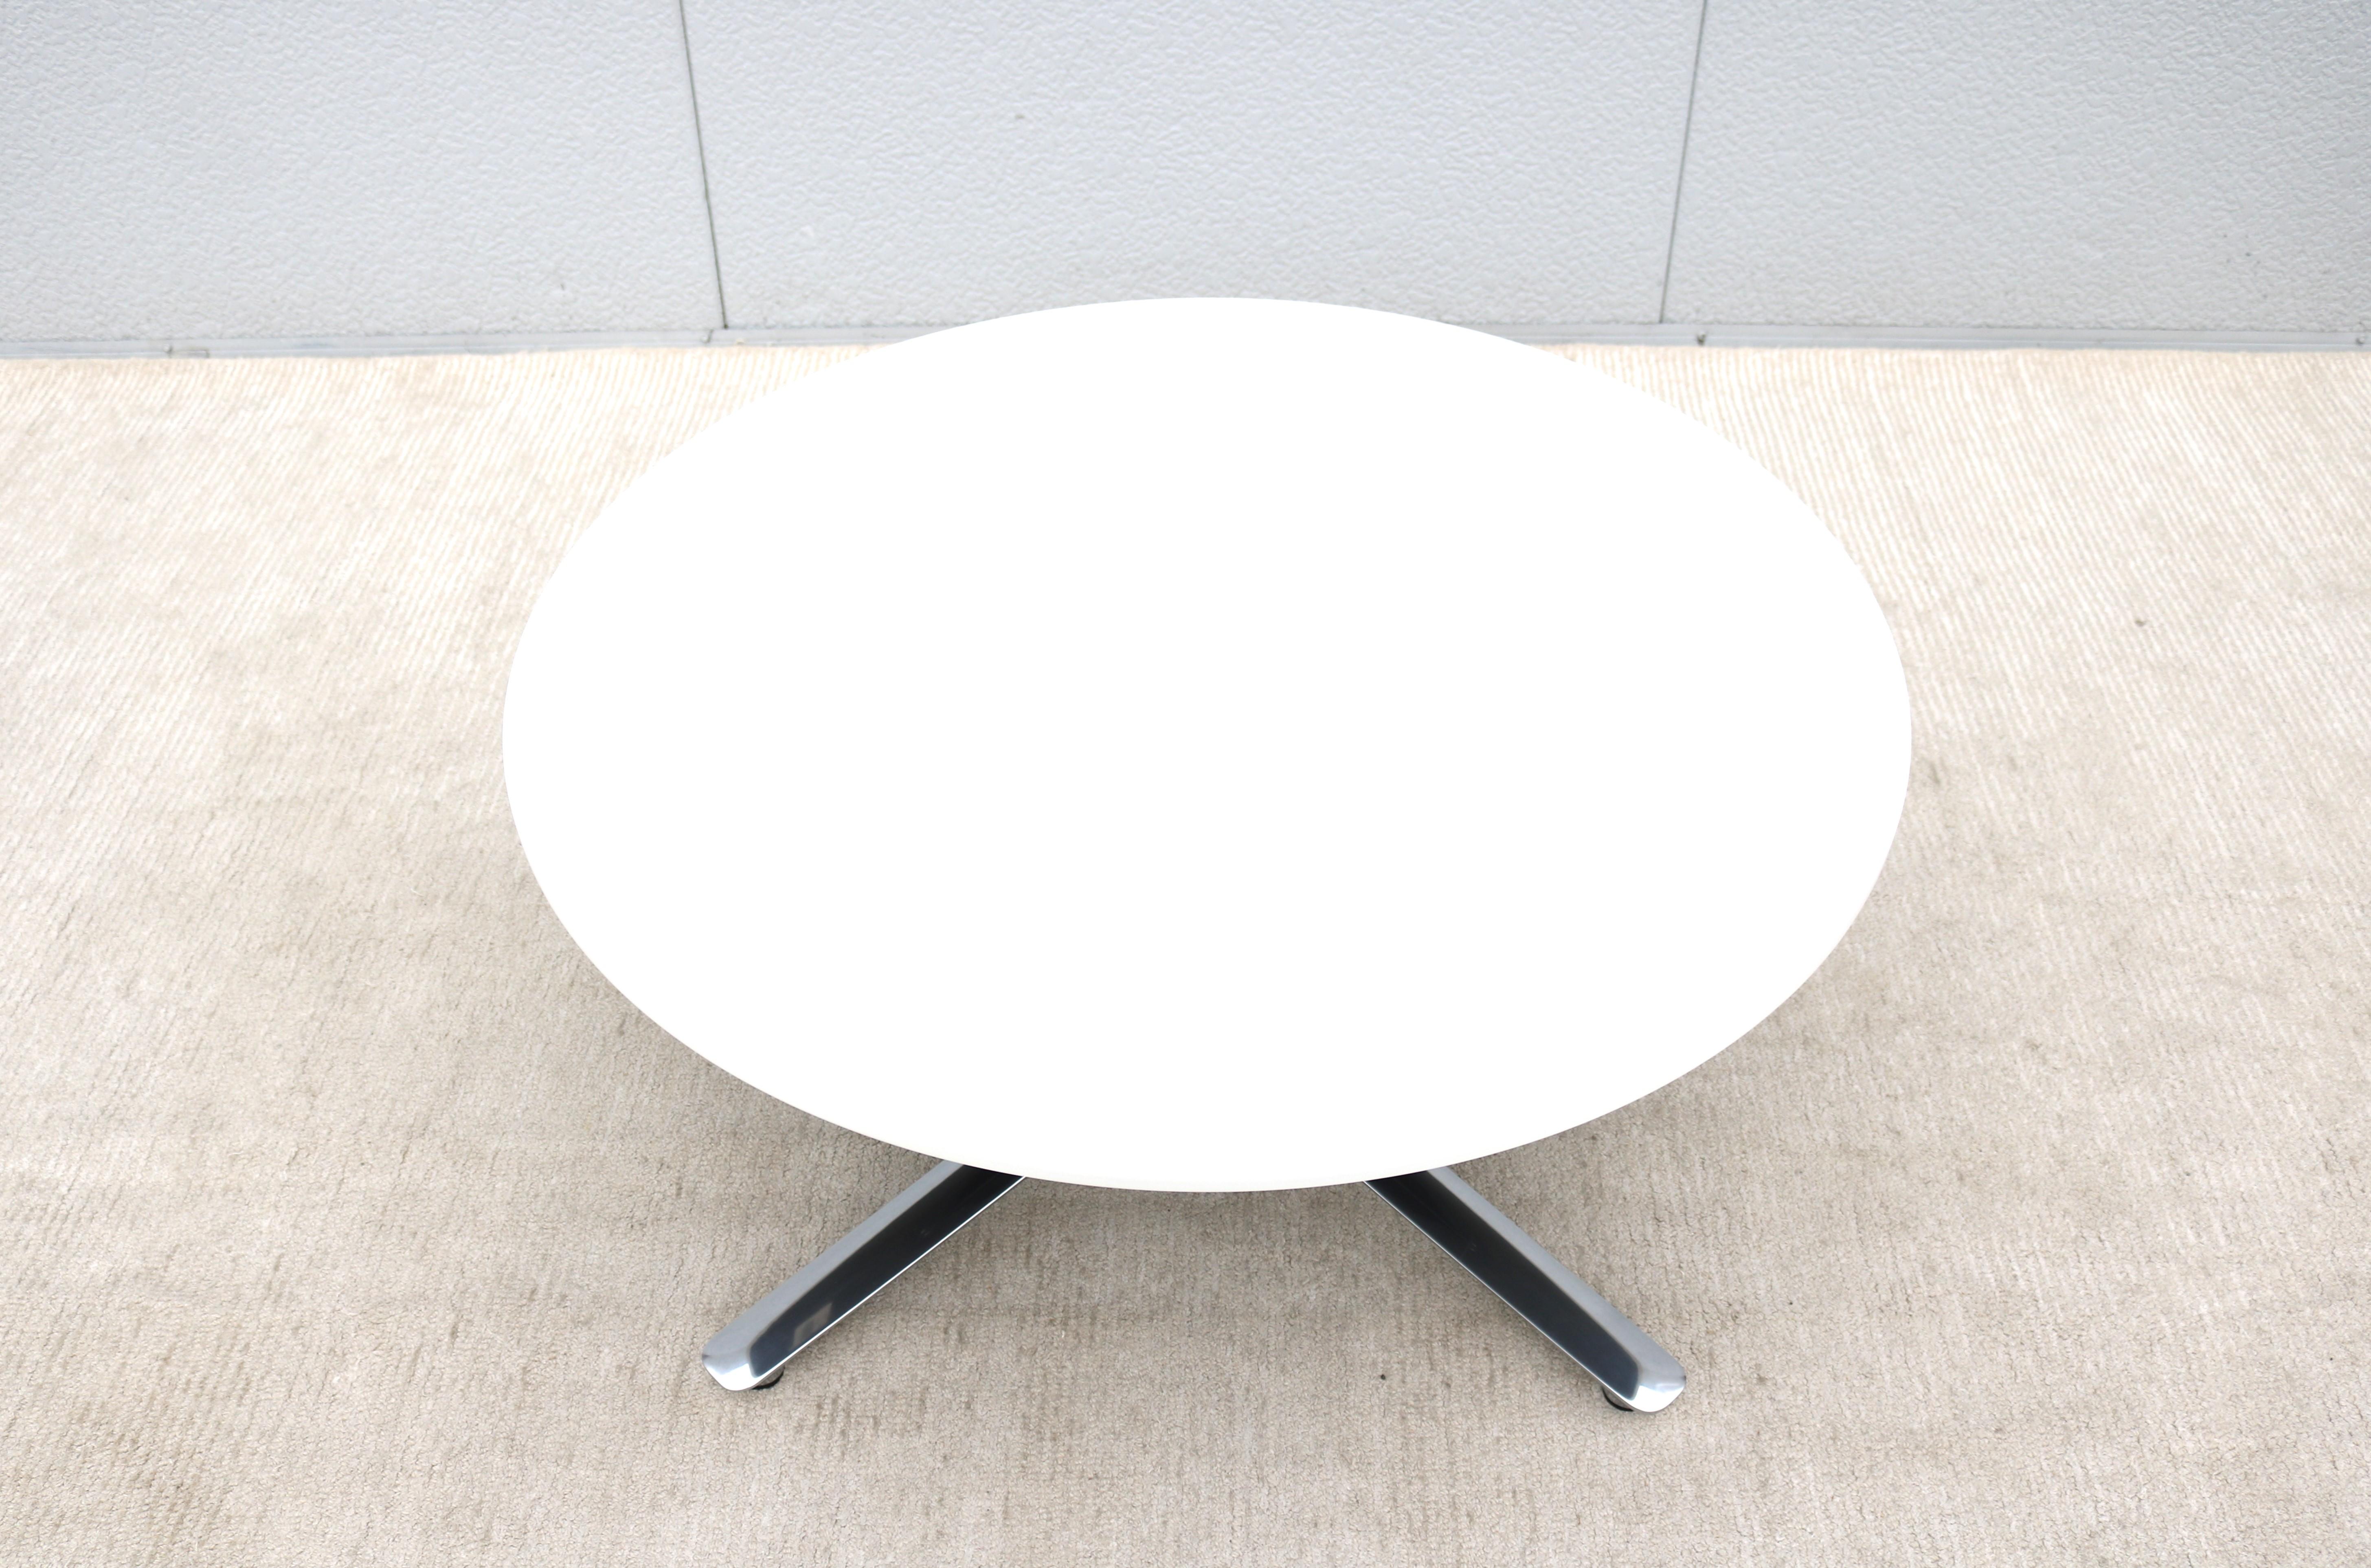 Modern Mario Ruiz for Studio TK Bevy Round White Corian Top Coffee Table In Excellent Condition For Sale In Secaucus, NJ